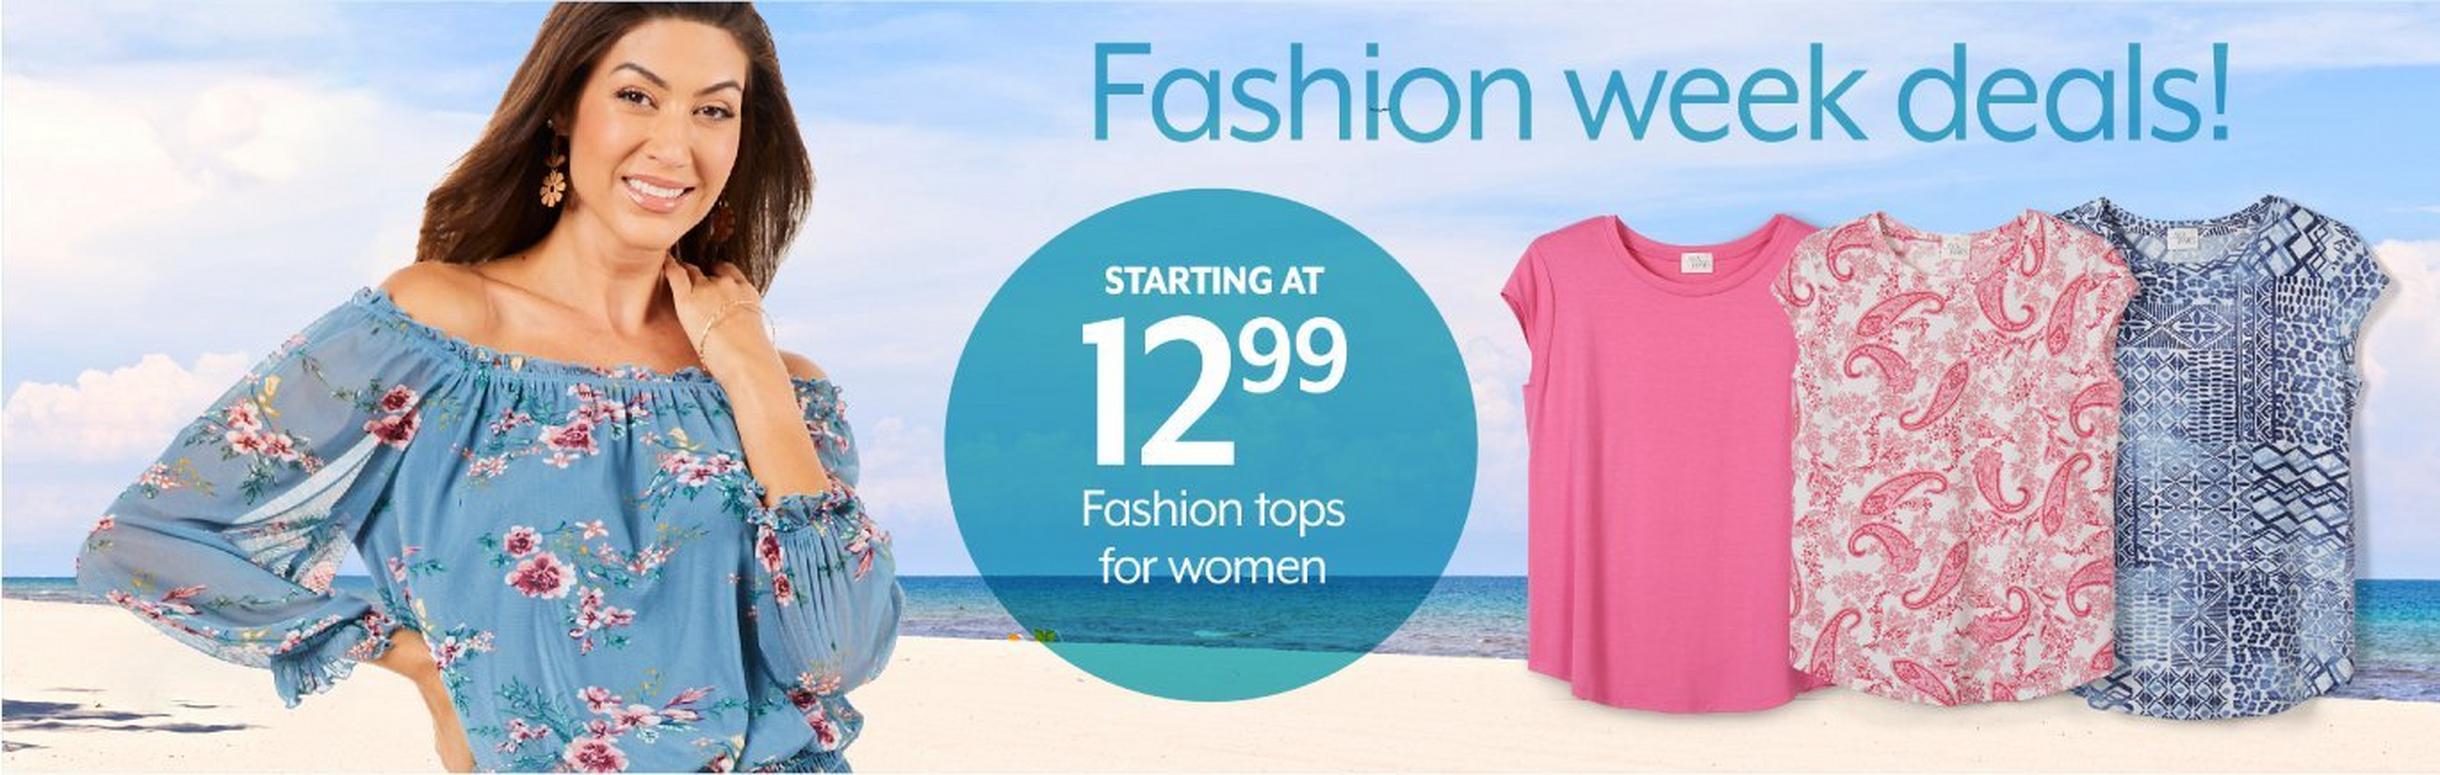 Starting at 12.99 Fashion tops for women